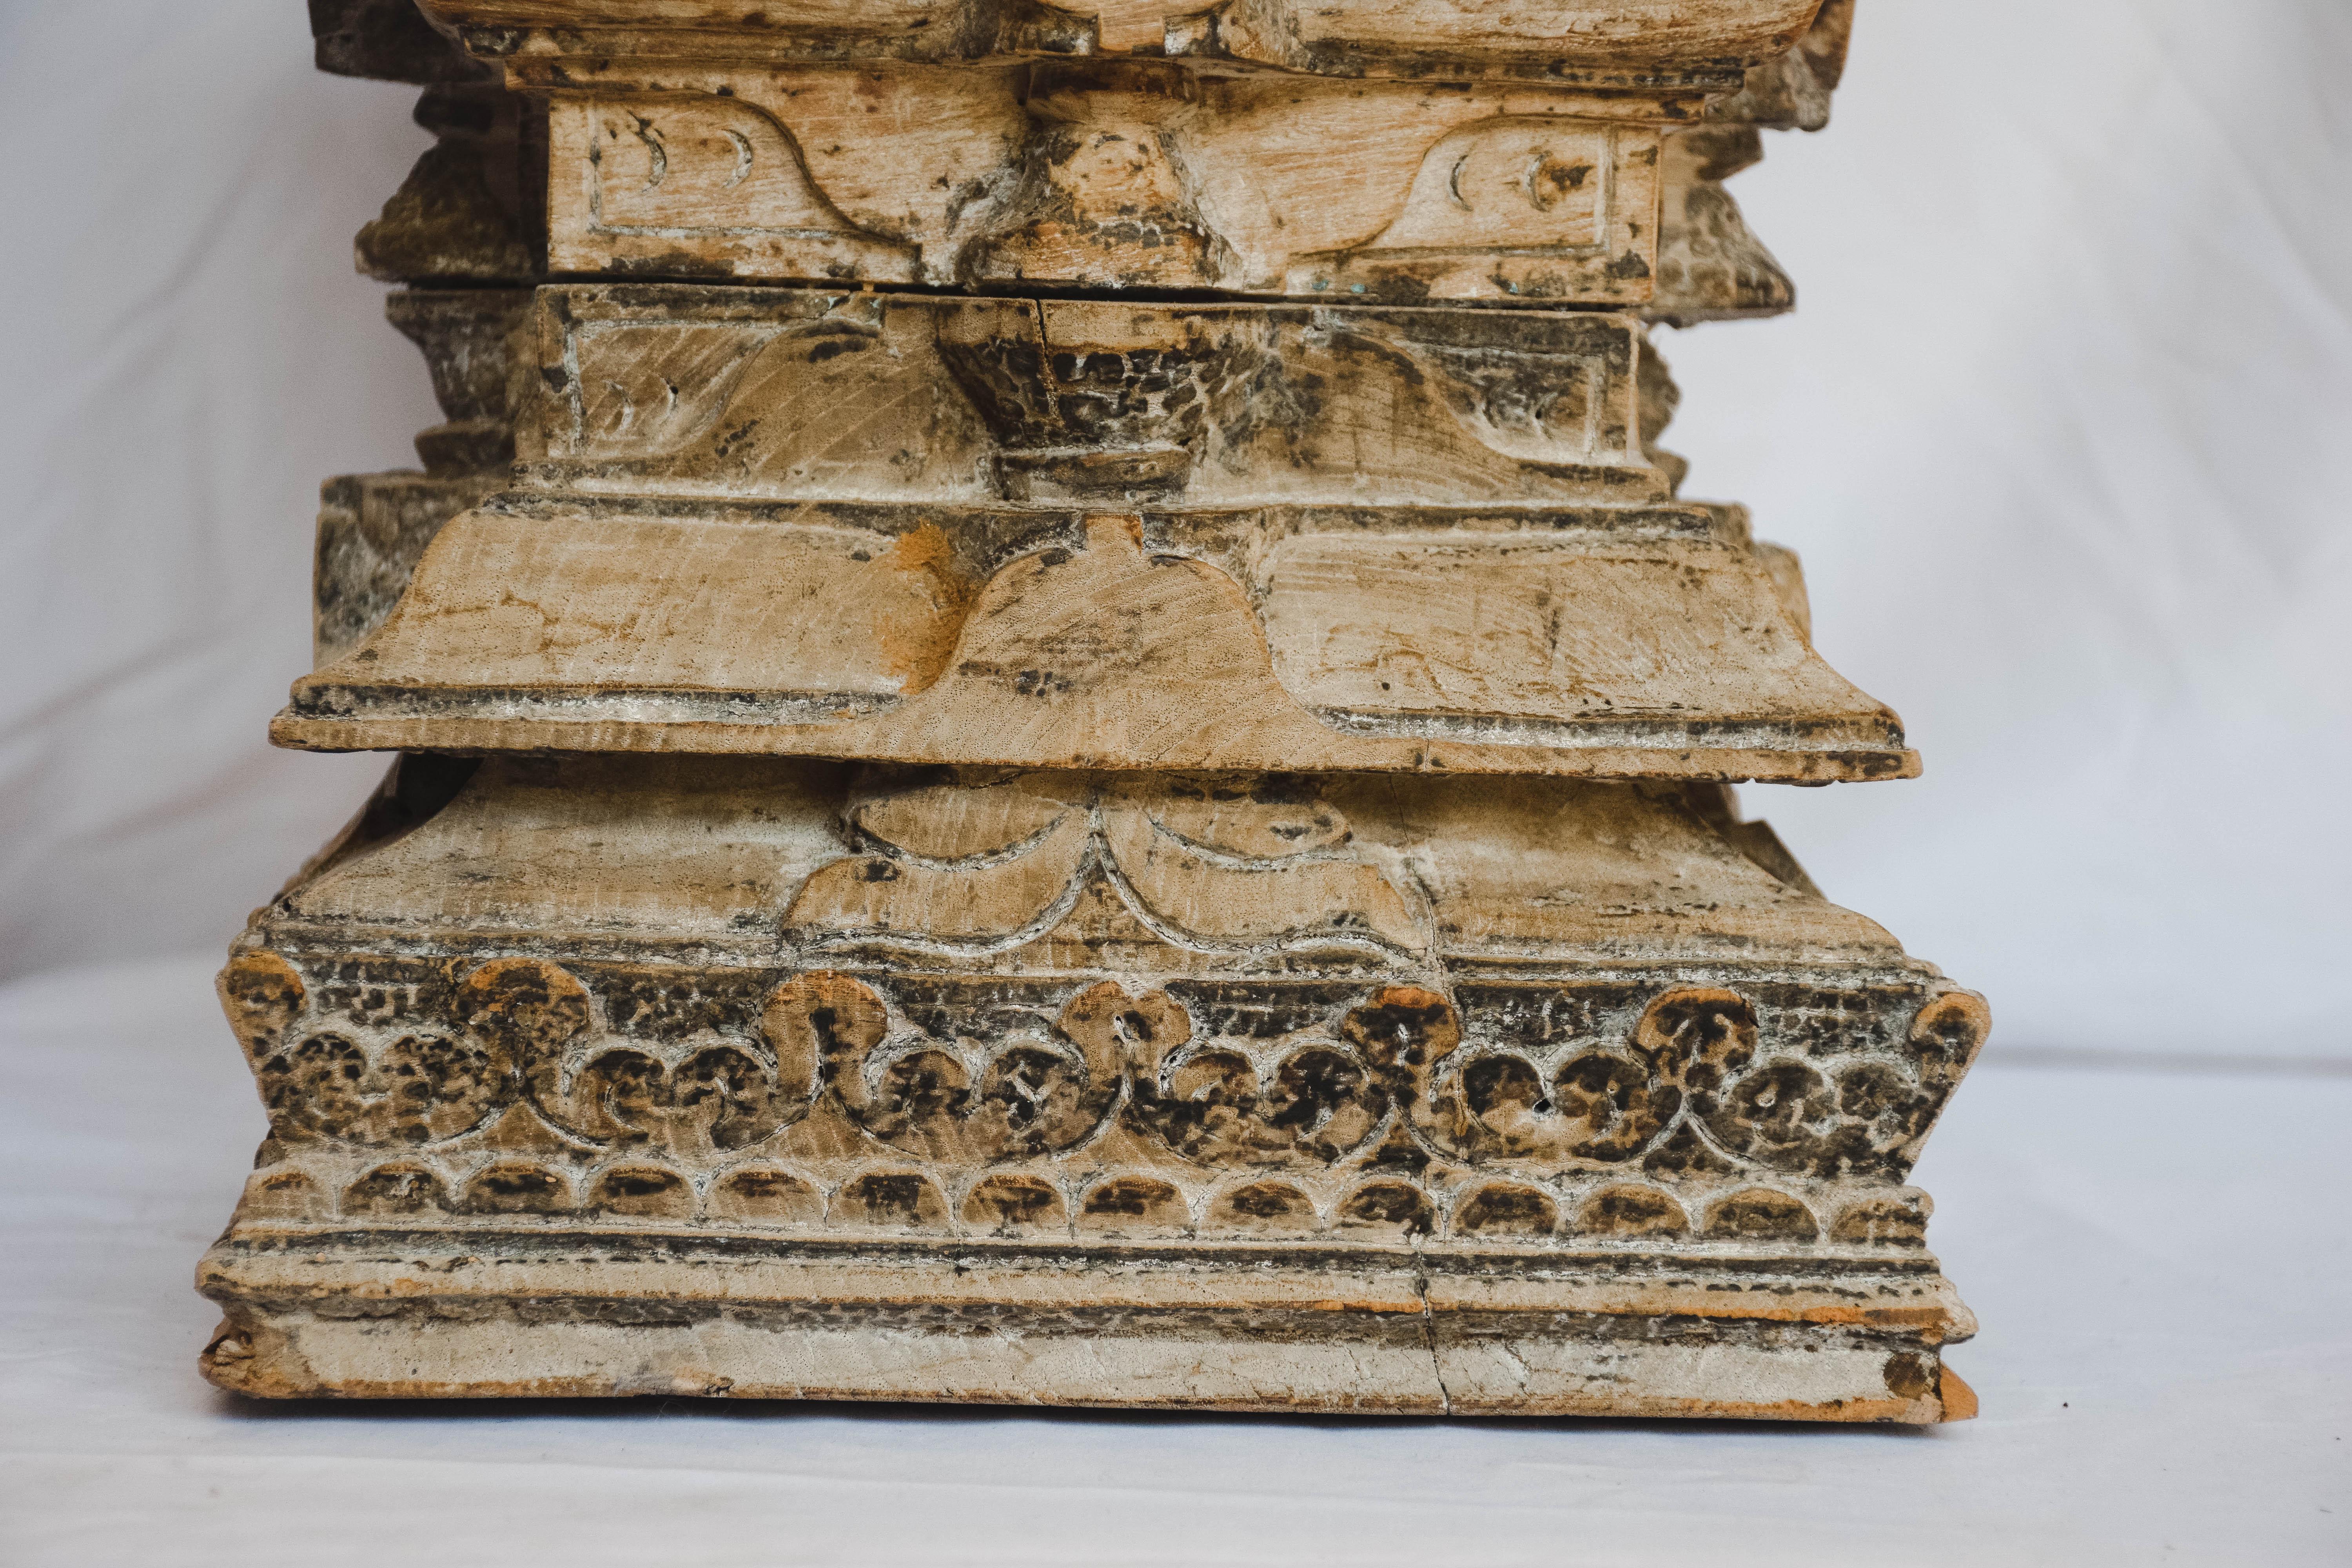 This antique wood column capital or pilaster is wonderfully hand carved and very decorative. Would be beautiful alone or great used as a riser or pedestal with candles or to display other decorative objects.